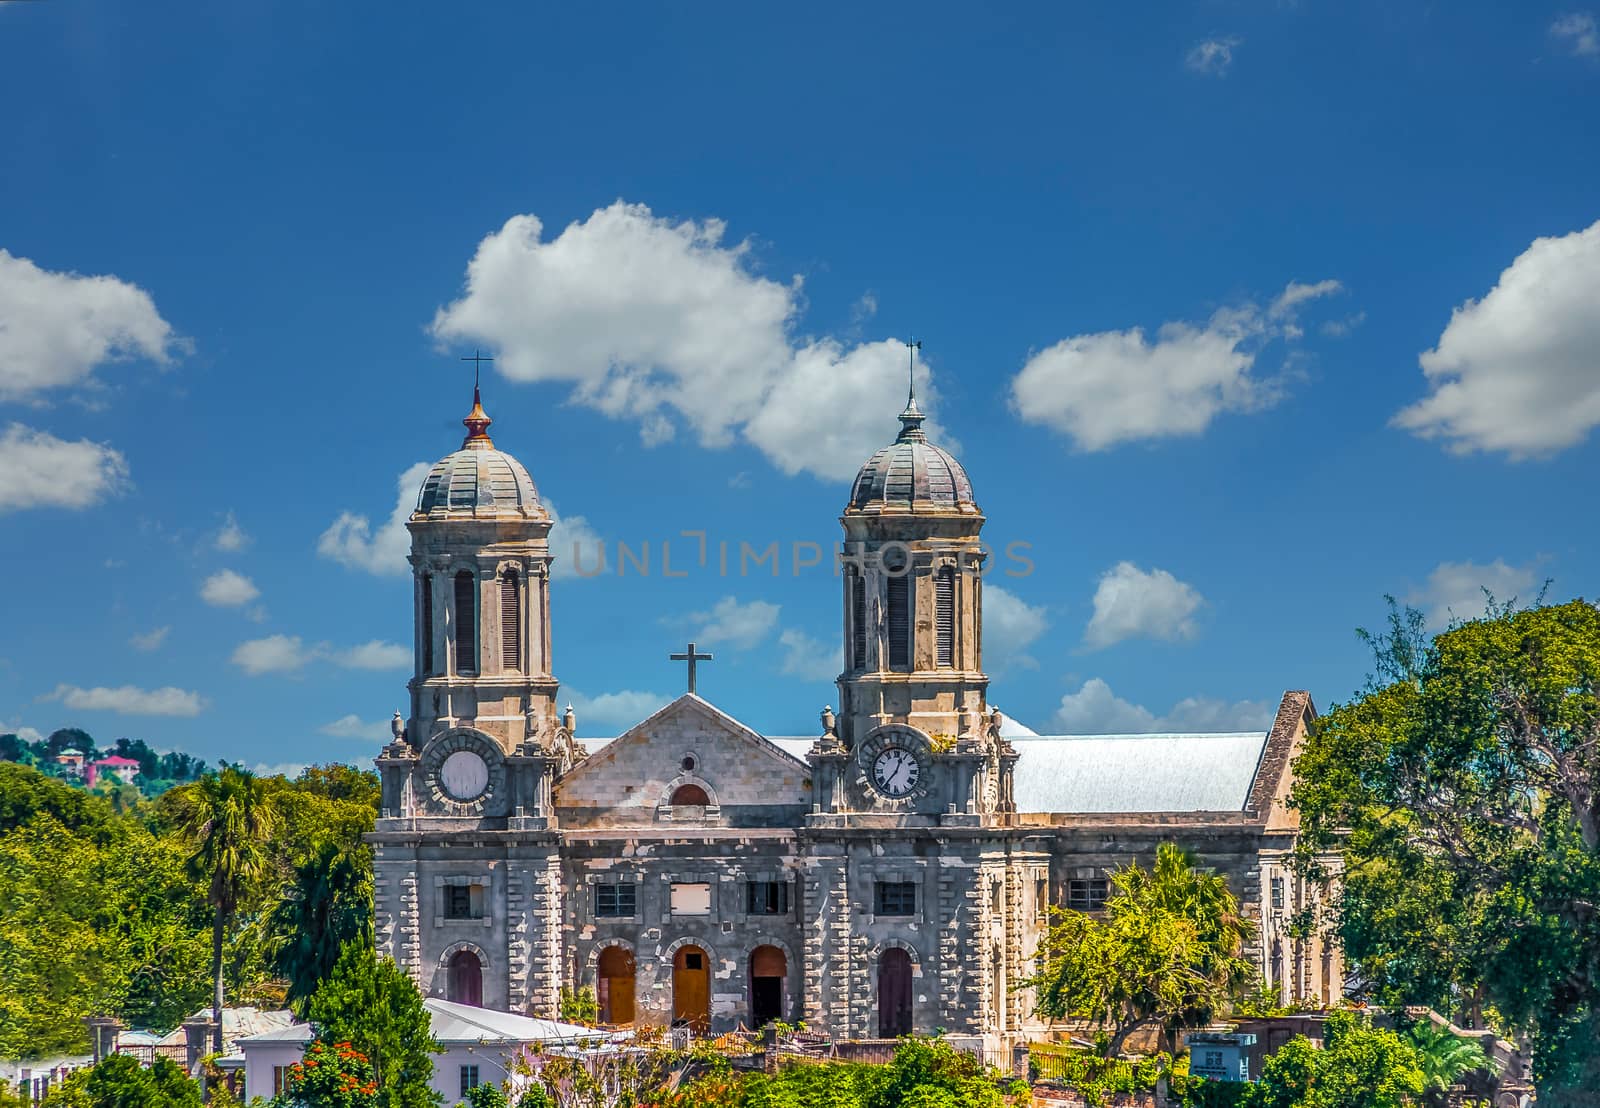 Saint John's Cathedral in Antigua by dbvirago